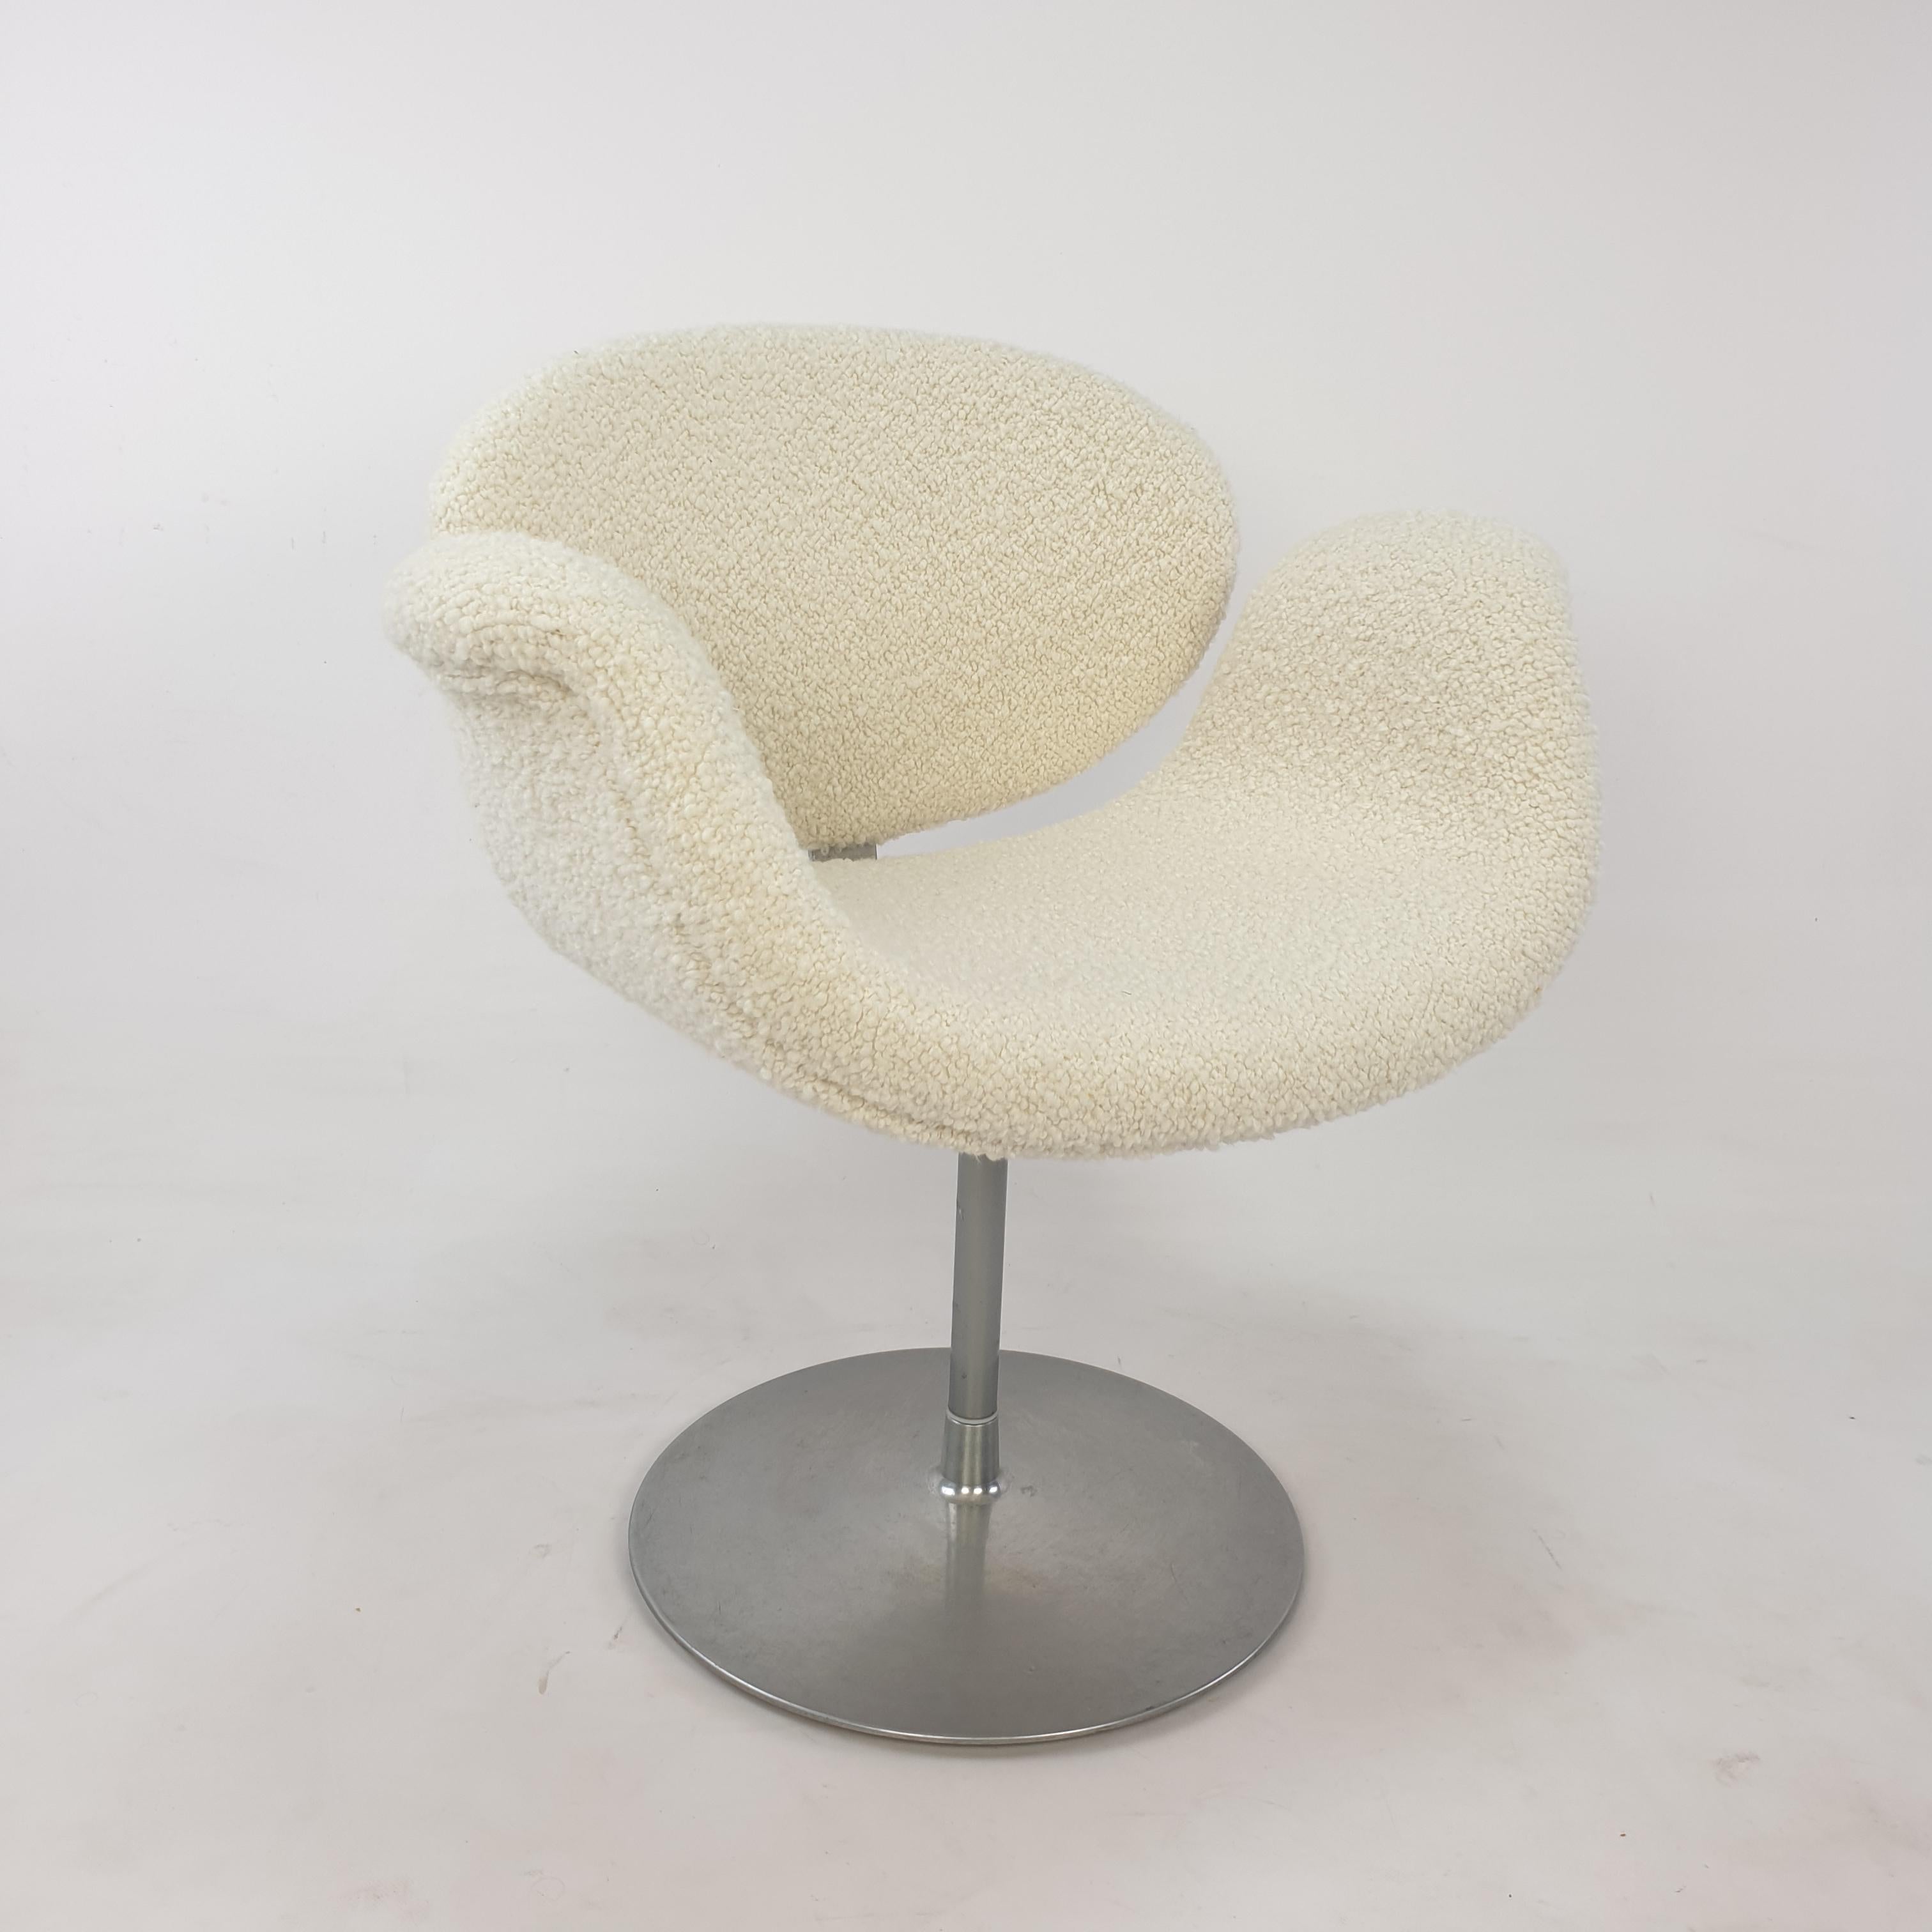 Cute and very comfortable pivoting armchair, designed by the famous Pierre Paulin in te 60's. Fabricated by Artifort in the 80's. Round metal base with a wooden frame, just upholstered with lovely and very soft Italian bouclé wool fabric. The chair